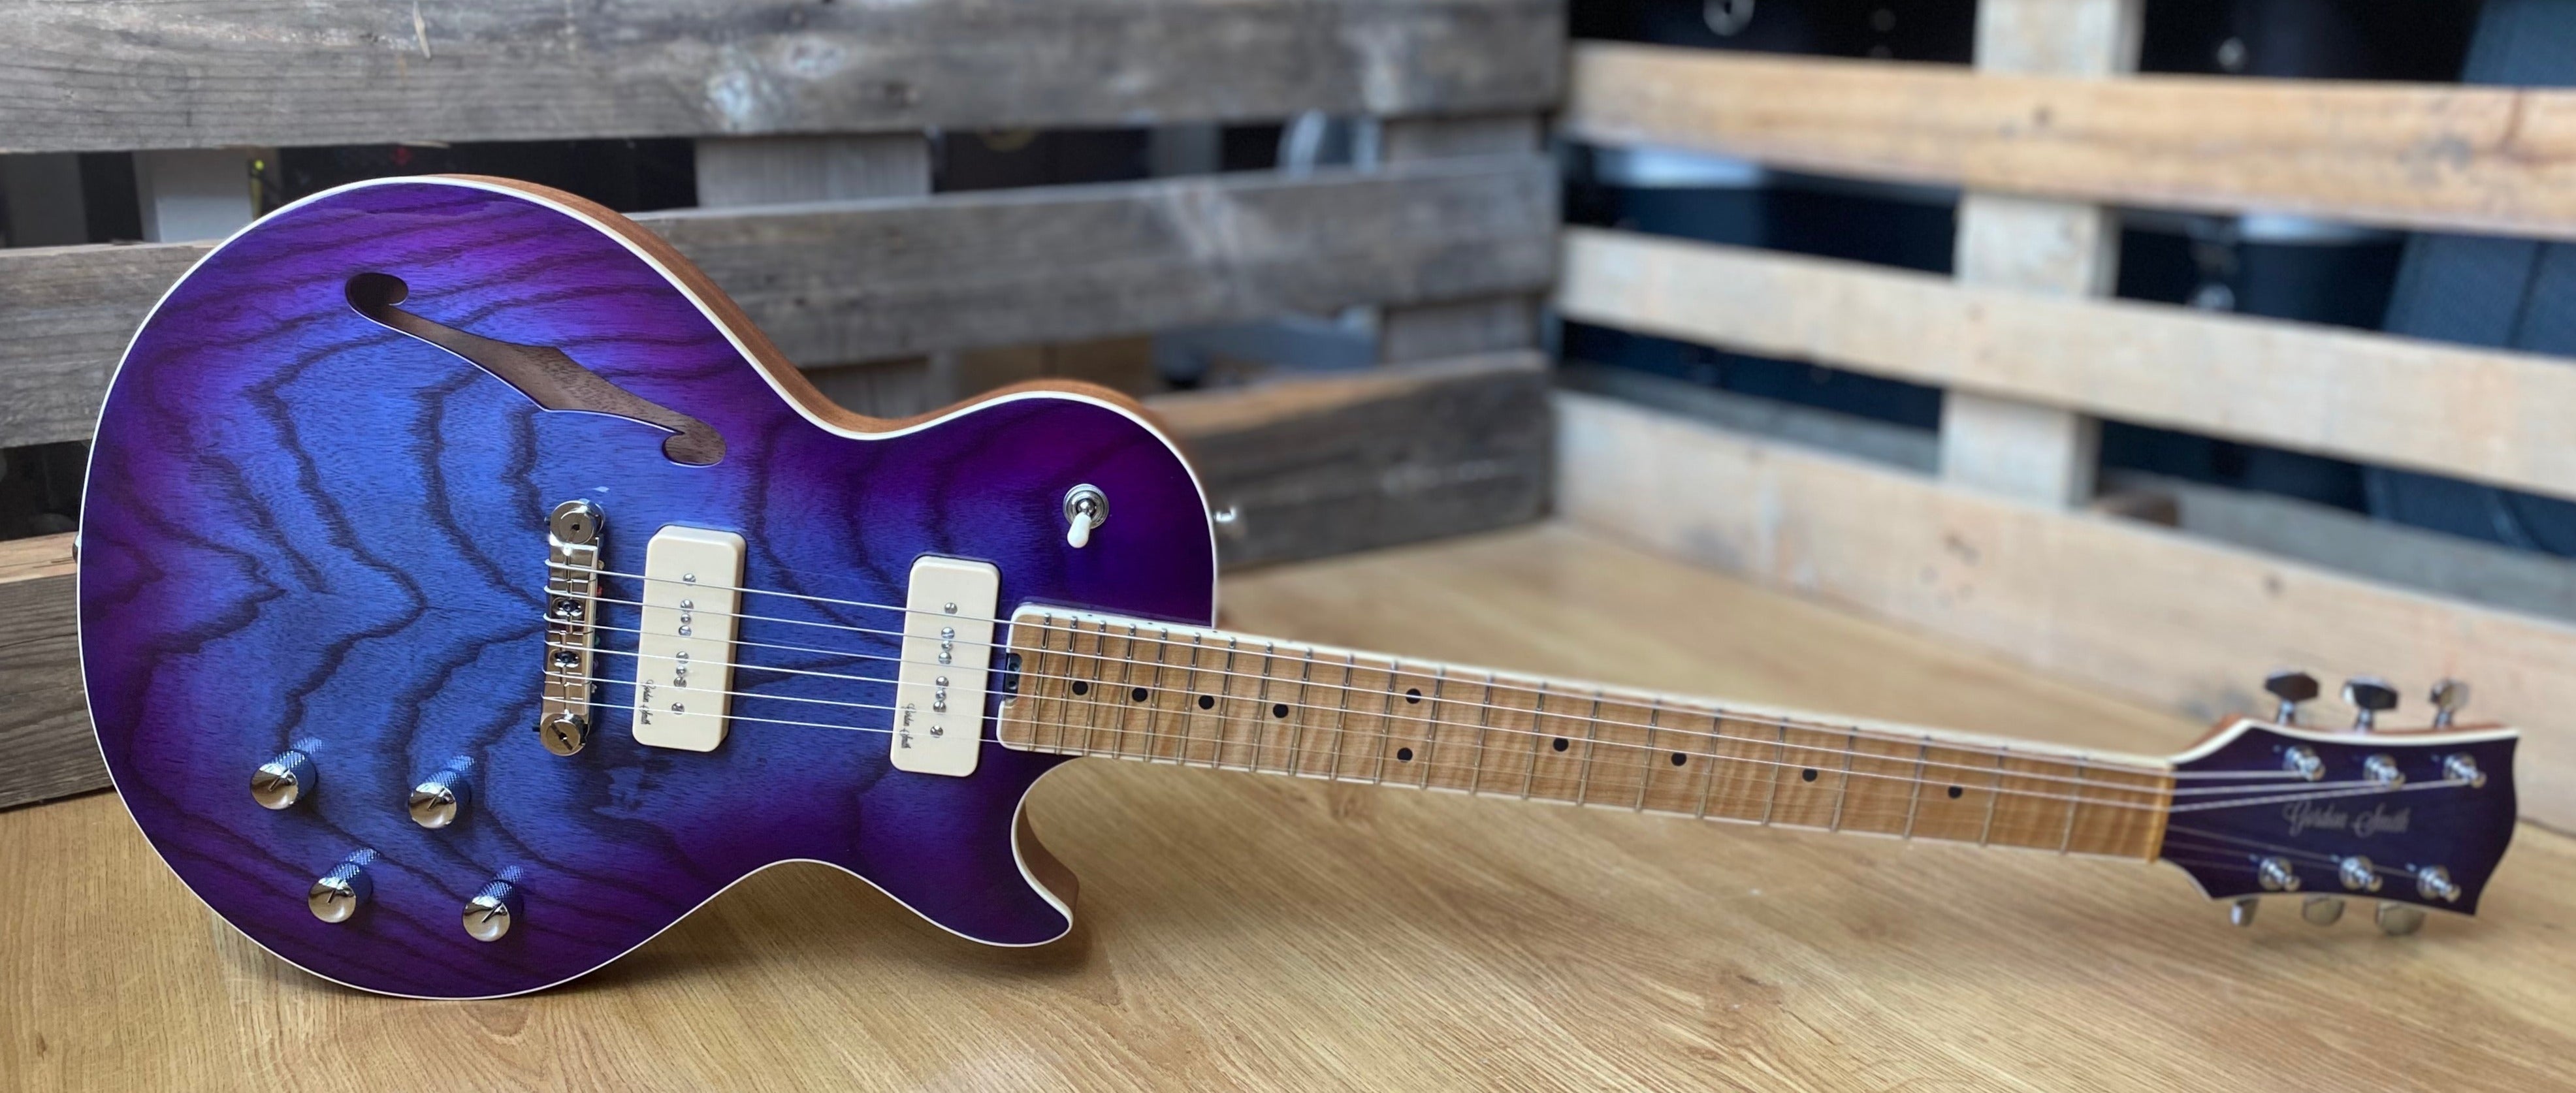 Gordon Smith GS Deluxe Semi Solid 60 Swamp Ash Top Custom Blueberry Burst, Electric Guitar for sale at Richards Guitars.